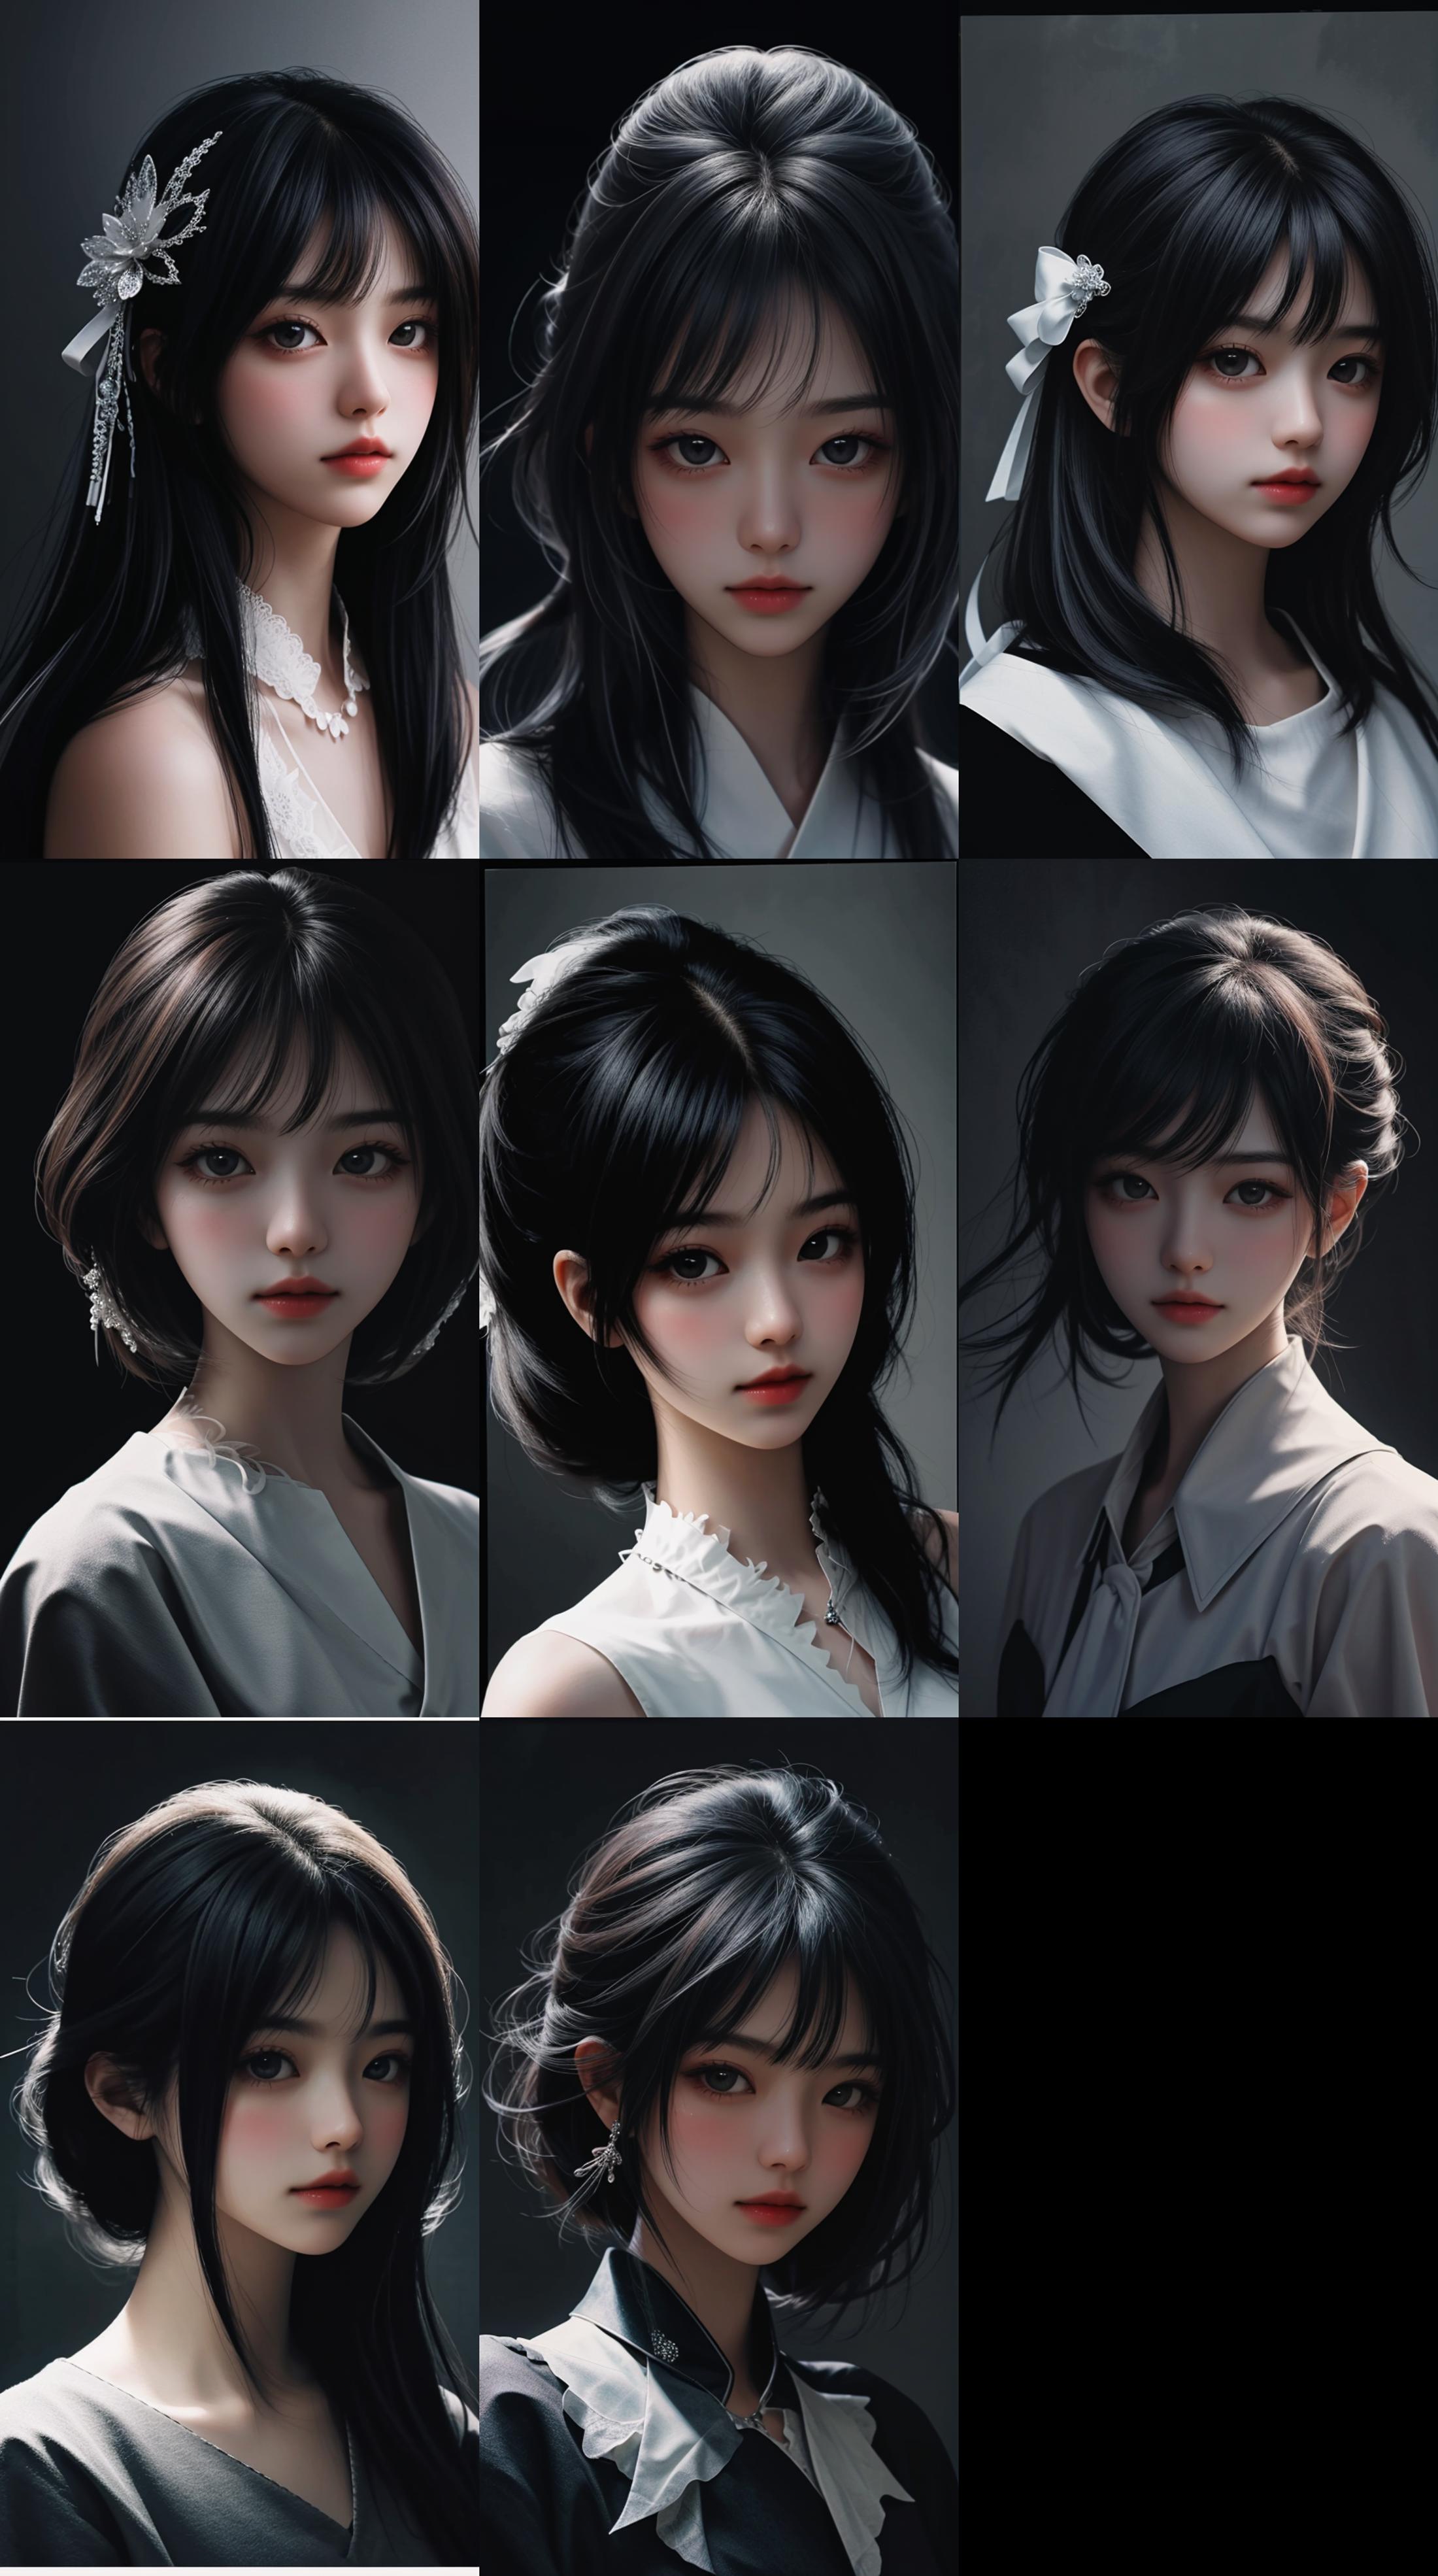 AI model image by Tasty_Rice